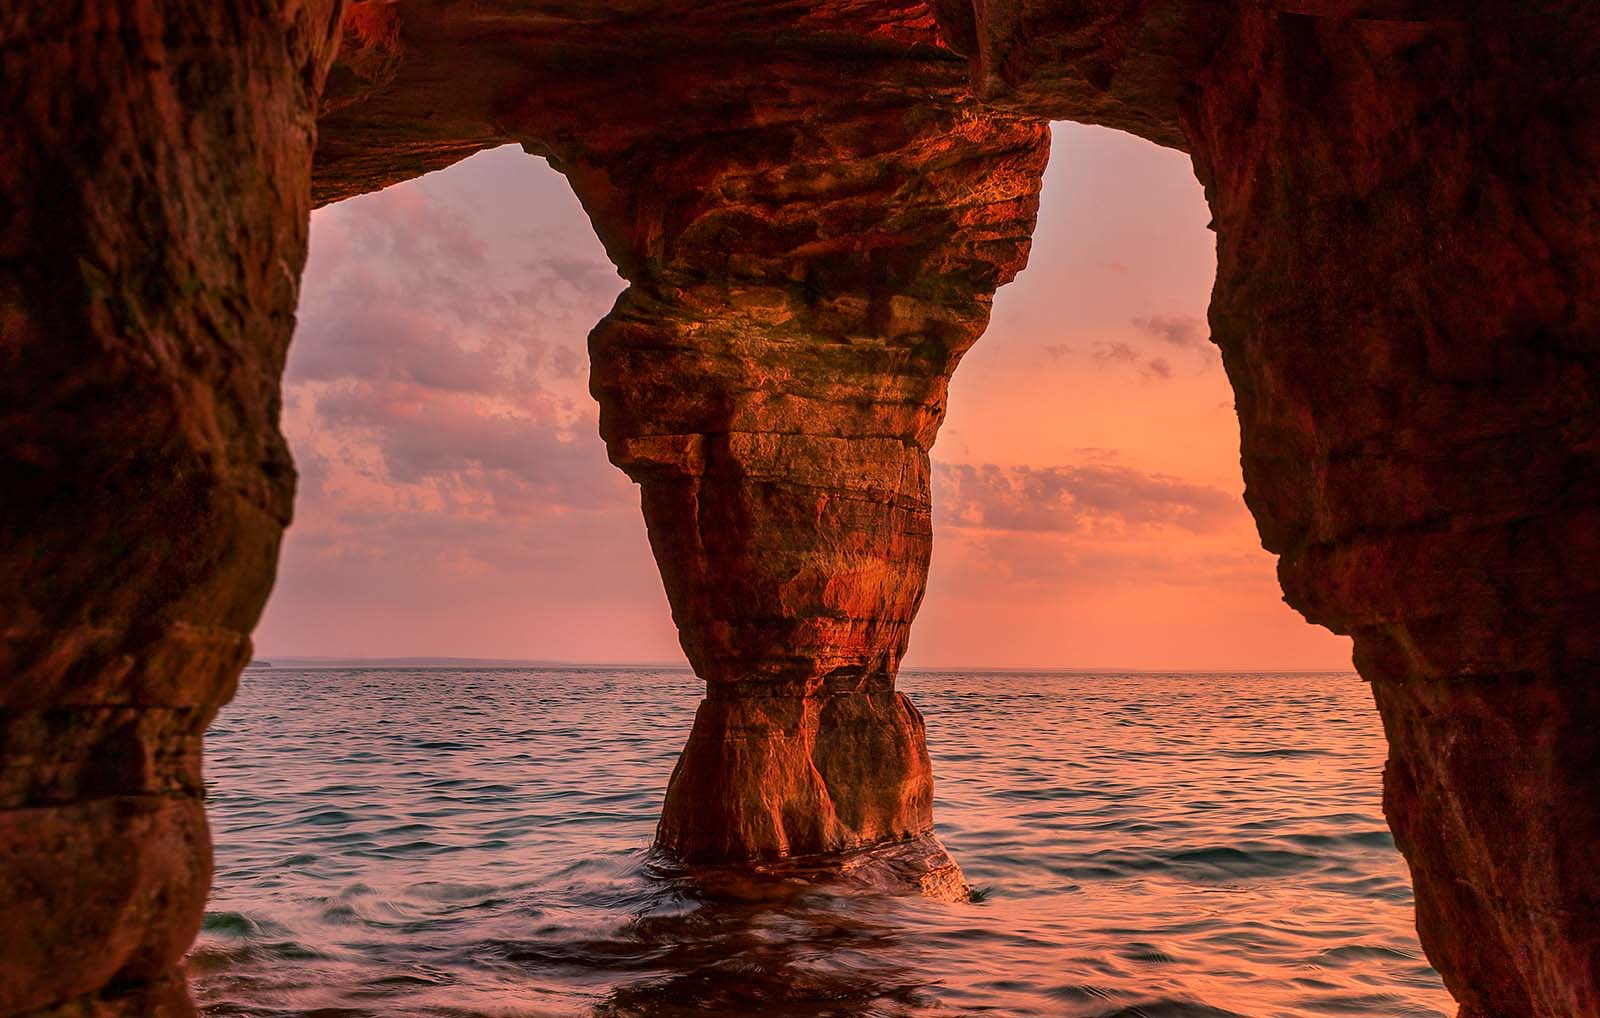 sunset from a sea cave on devil's island in the apostle islands national lakeshore on lake superior wisconsin.